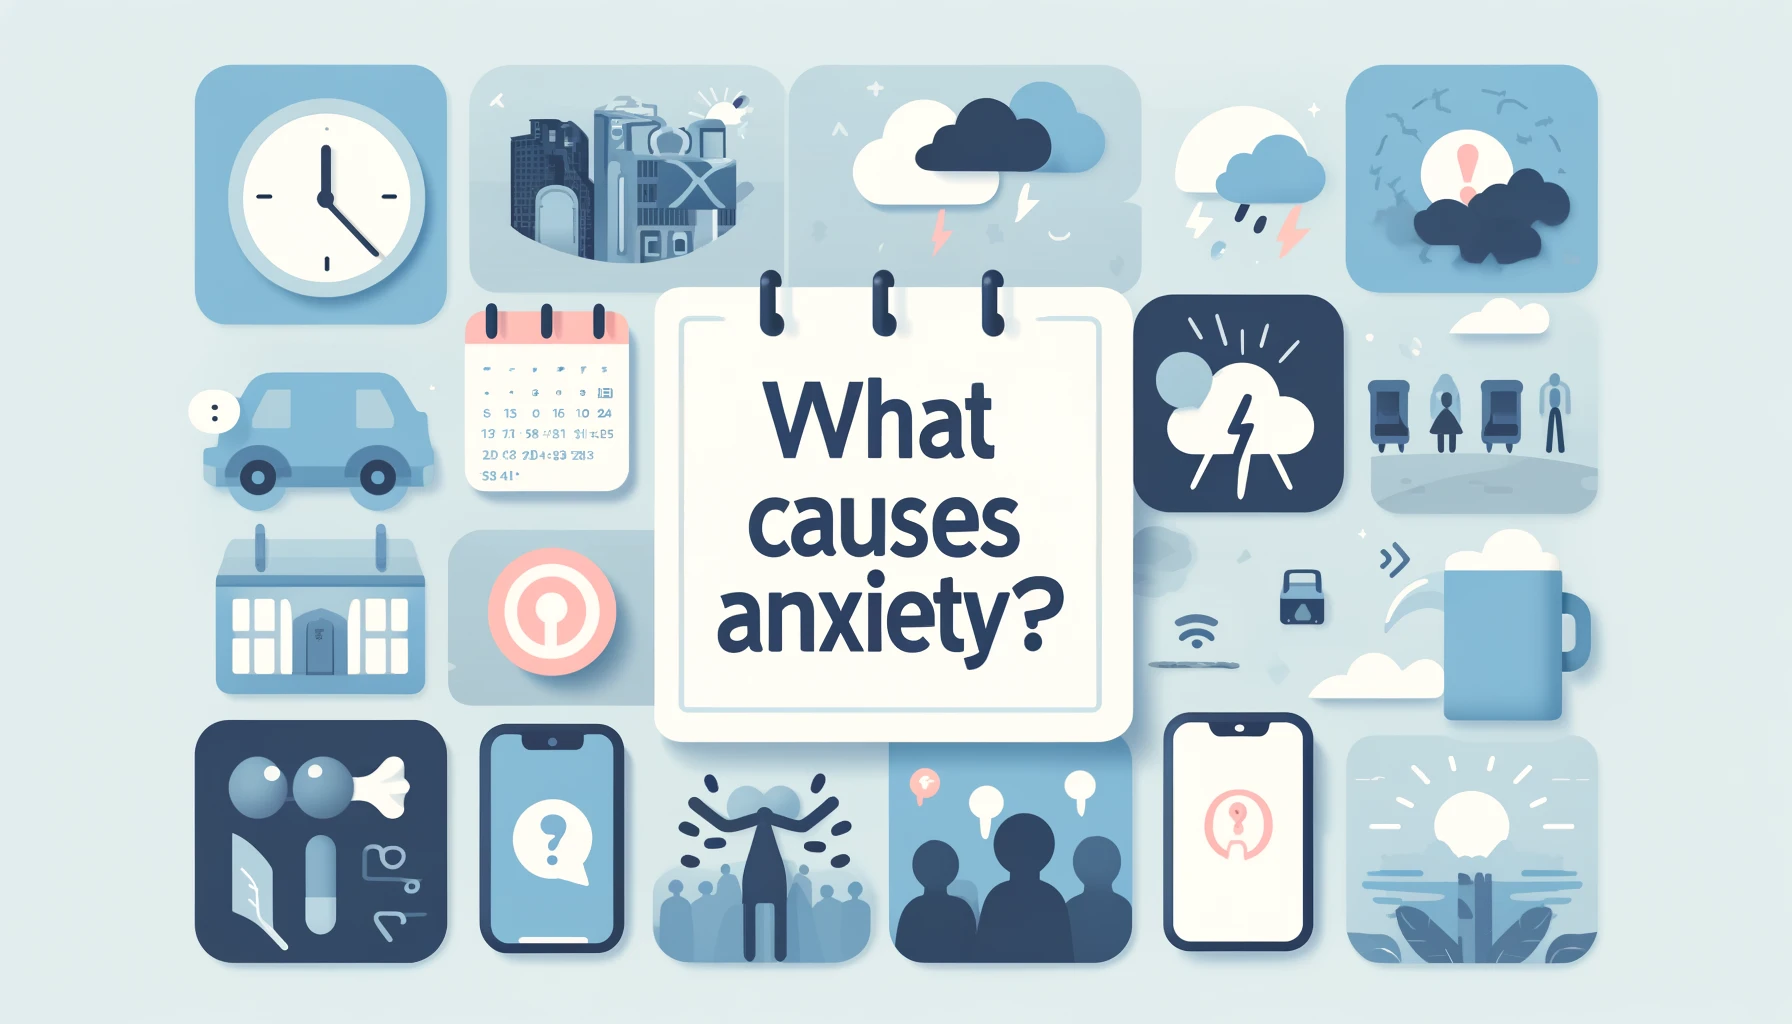 What causes anxiety?